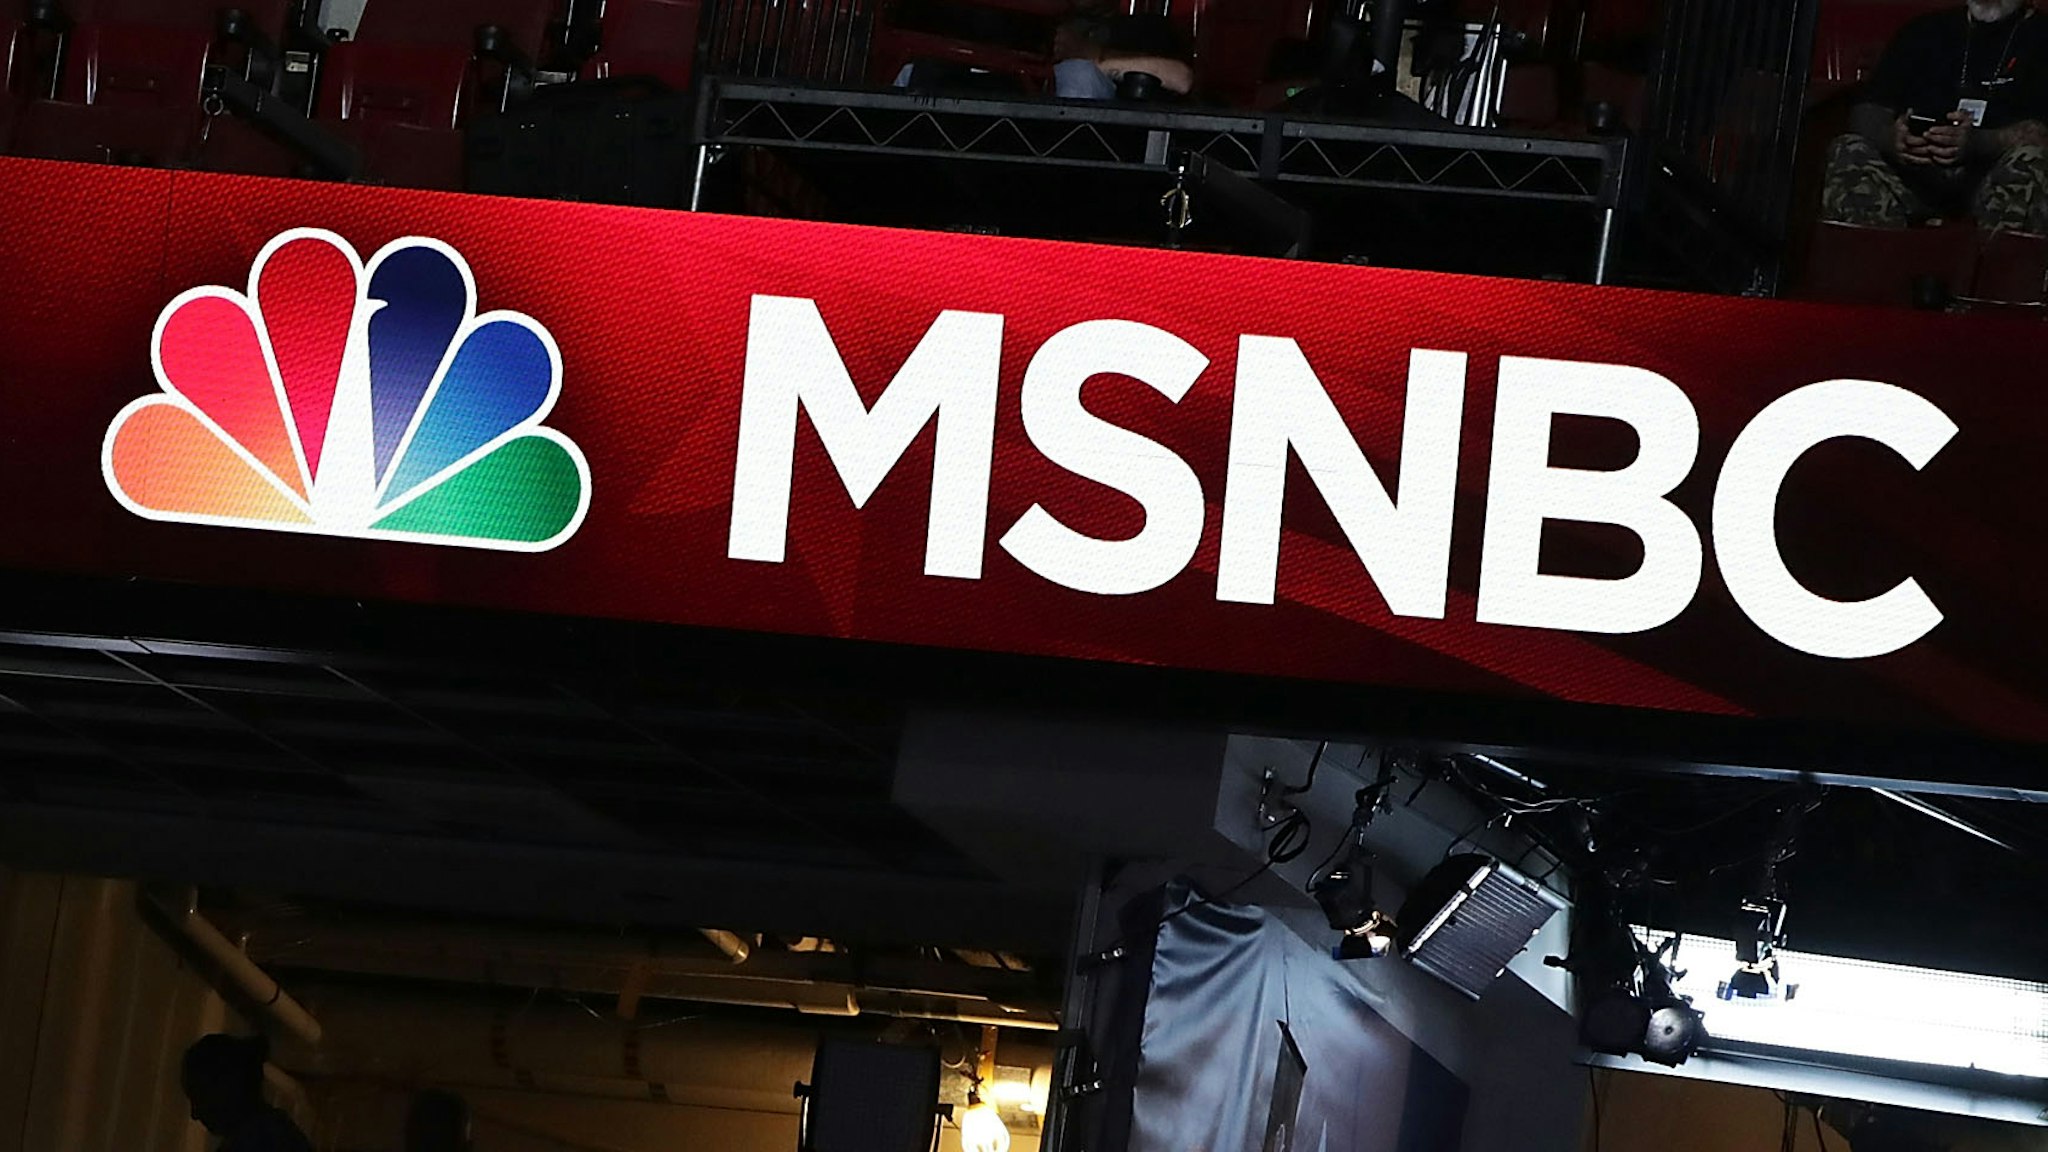 PHILADELPHIA, PA - JULY 24: A booth of NBC News and MSNBC is seen at the Wells Fargo Center on July 24, 2016 in Philadelphia, Pennsylvania. The Democratic National Convention opens July 25.